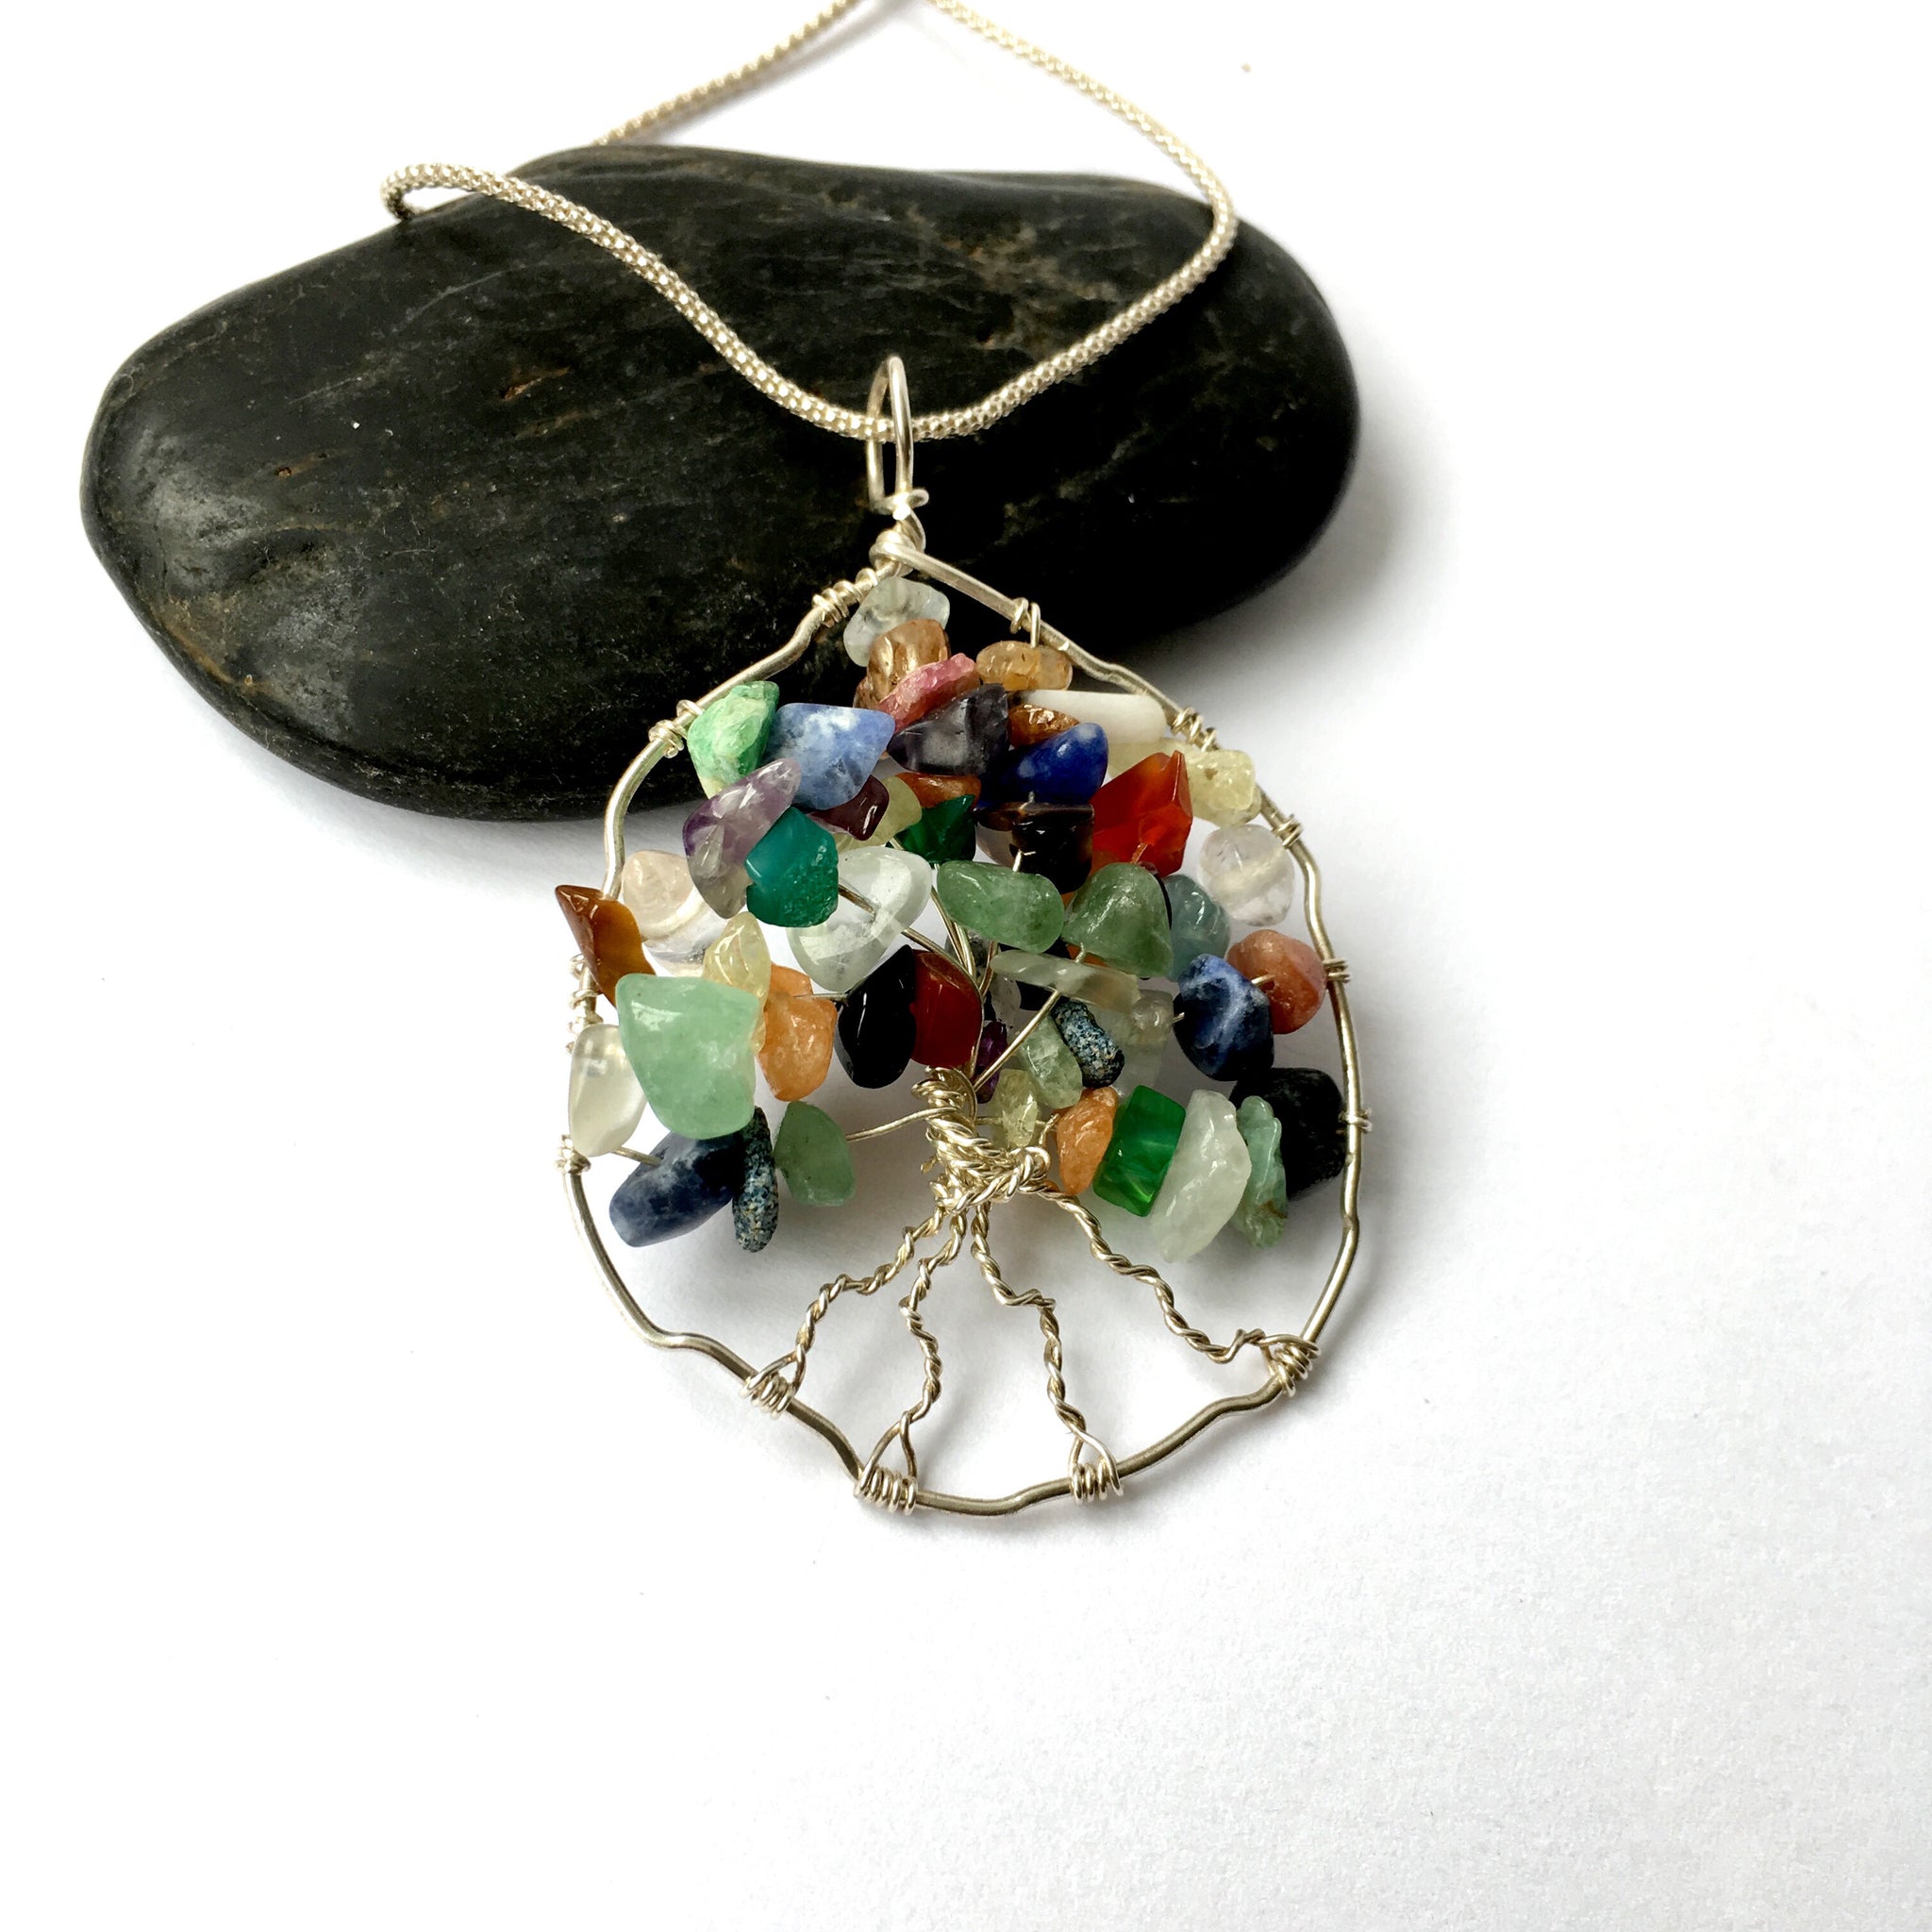 Handmade Circle Tree of Life Indian Agate Sterling Silver Pendant Necklace - Glitter and Gem Jewellery